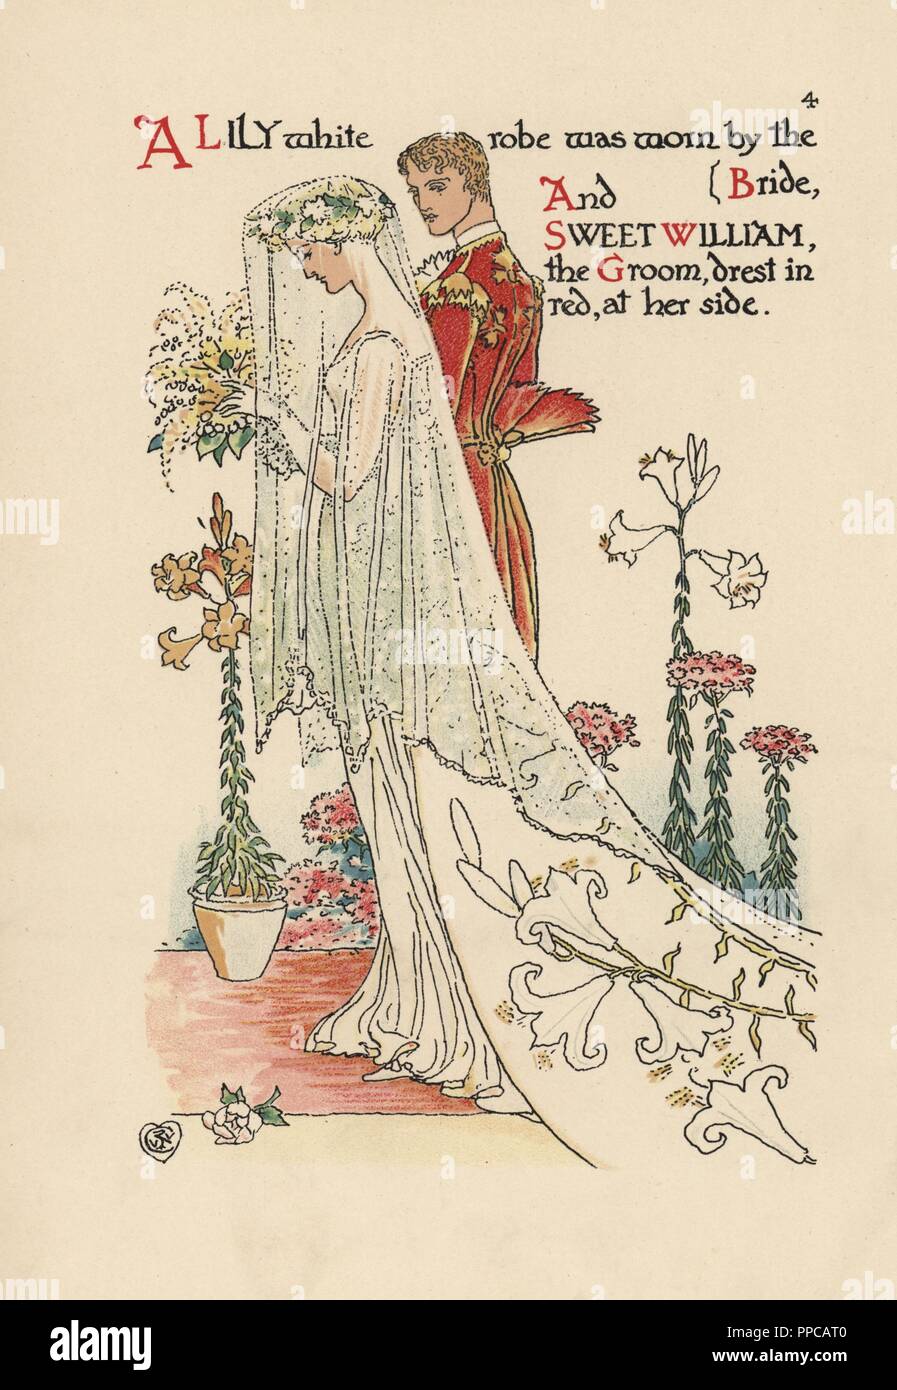 Flower fairies symbolizing a white lily, Lilium candidum, in wedding dress and veil, and sweet william, Dianthus barbatus, as the groom. Chromolithograph after an illustration by Walter Crane from A Flower Wedding, Cassell, London, 1905. Stock Photo